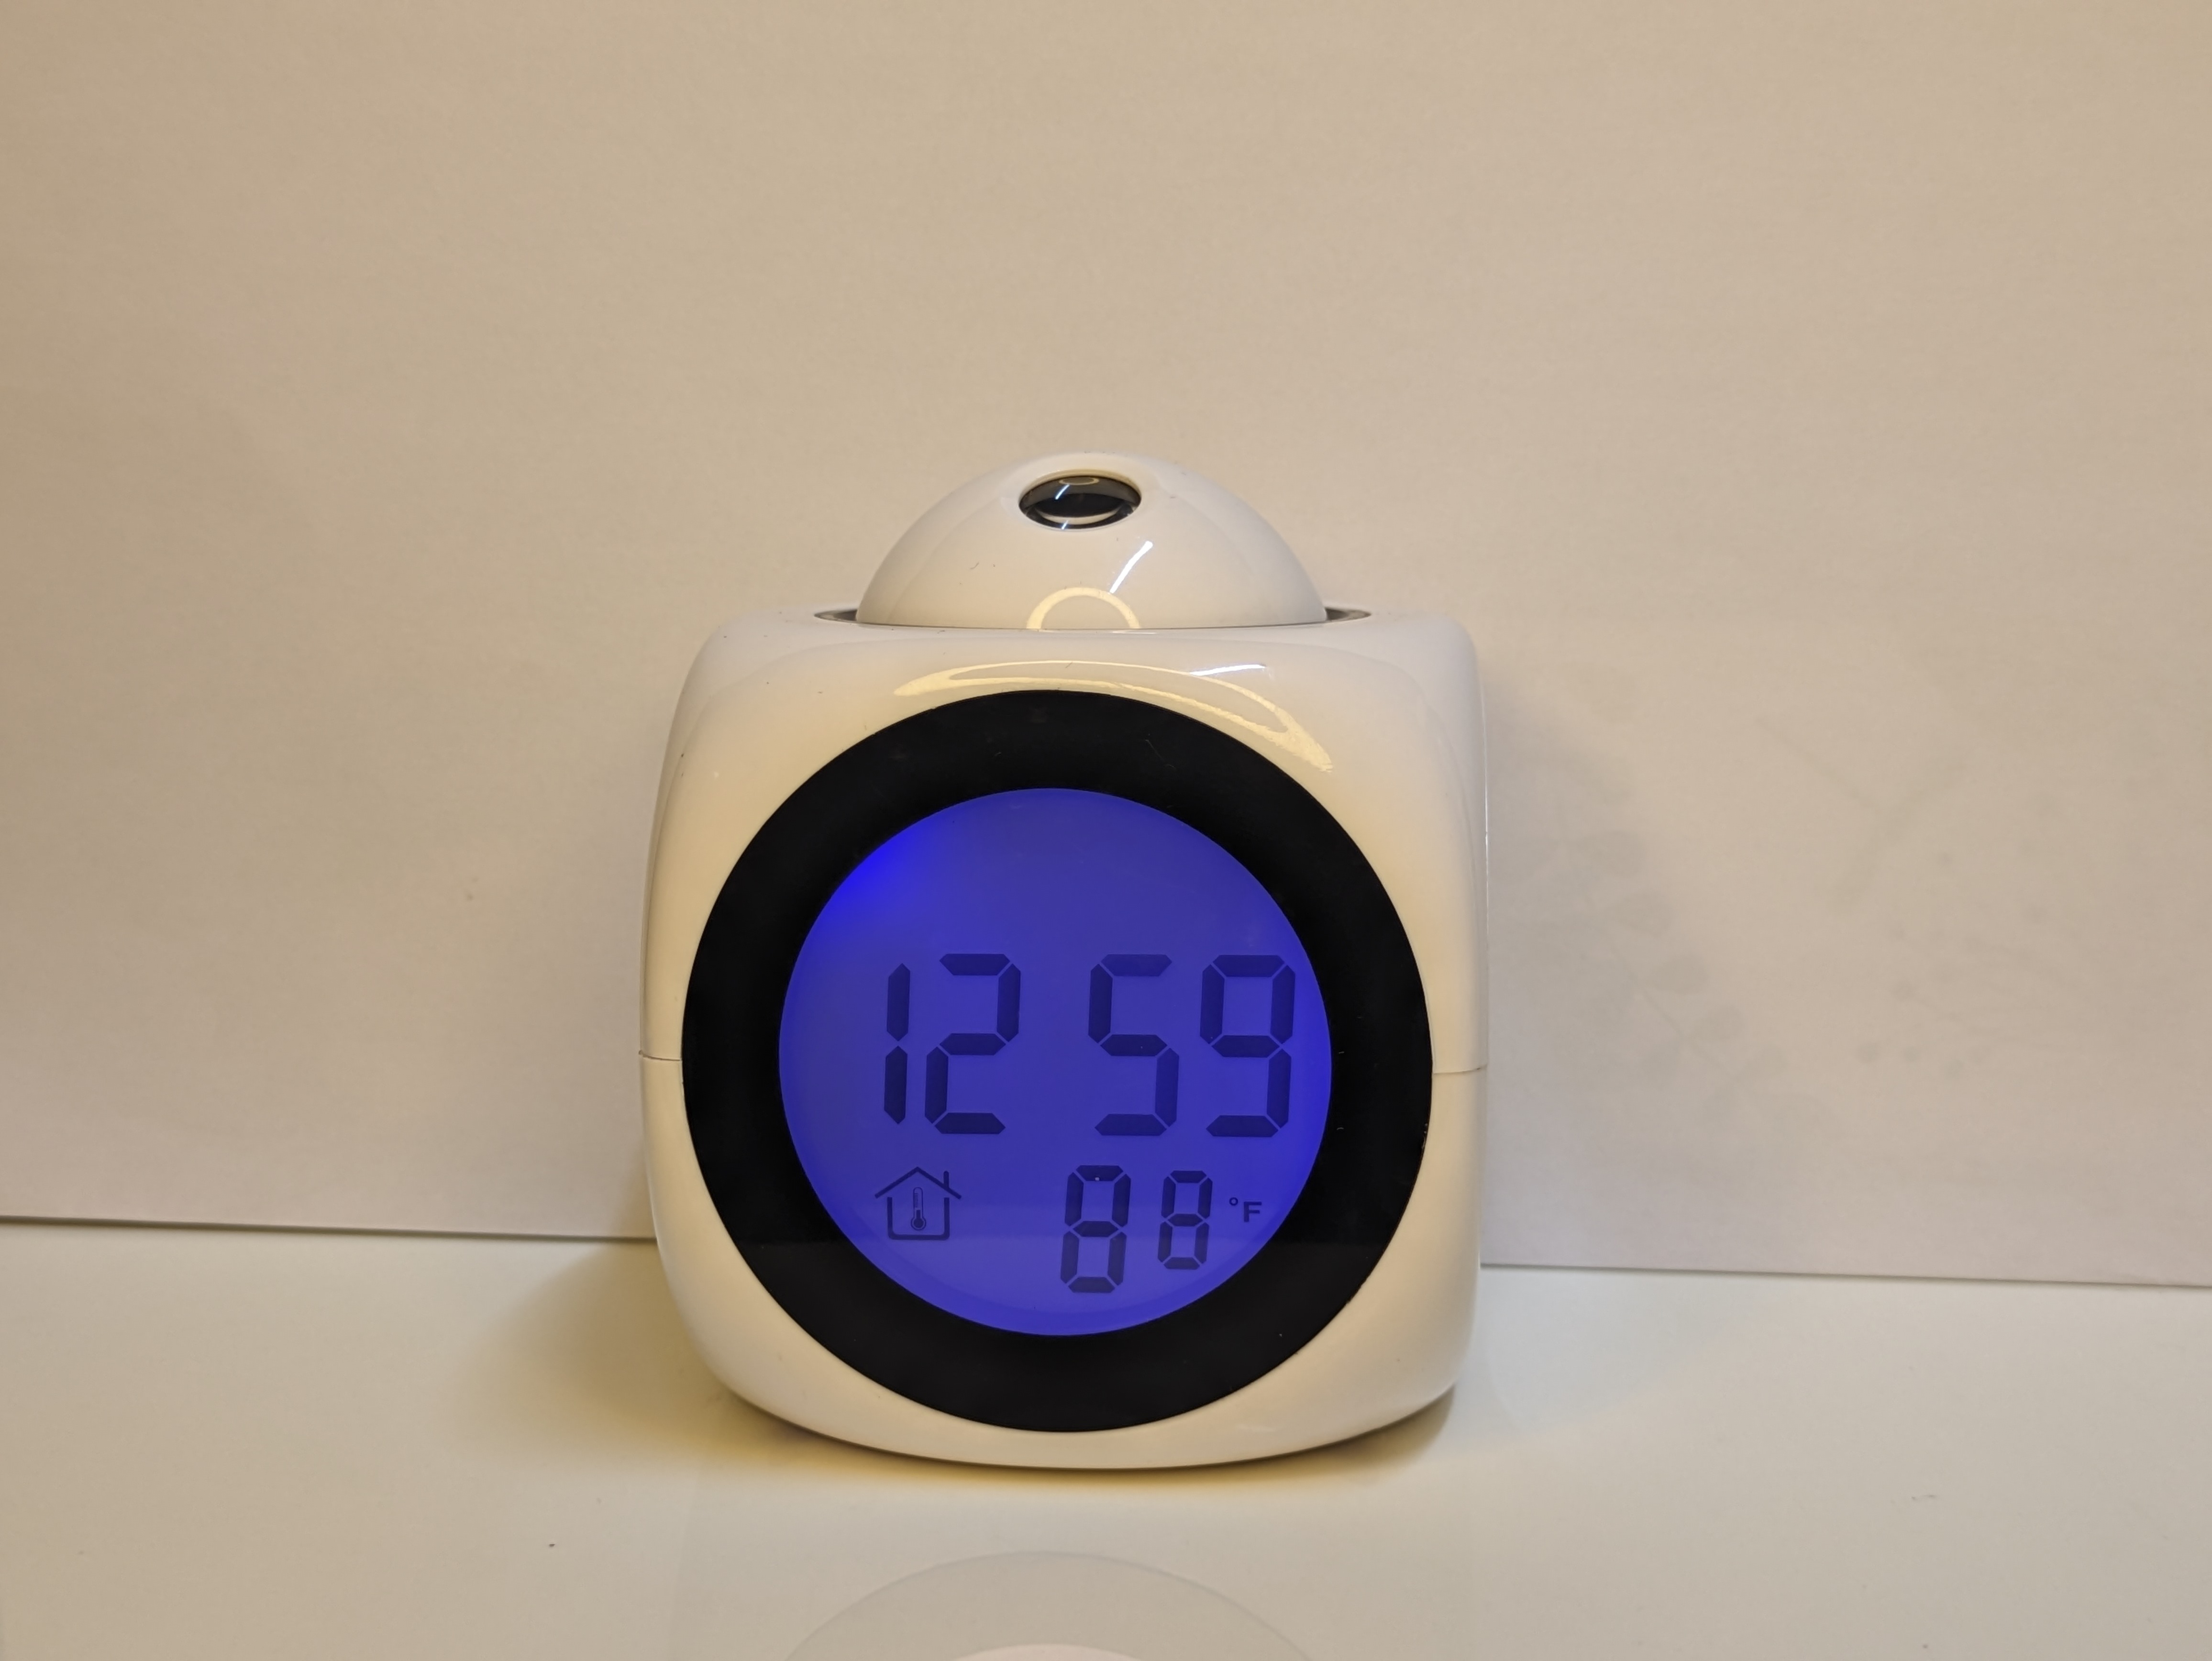 A rounded cube-shaped digital talking table clock image, with a led screen displaying the time on its body as 12:59, with a round protruding pressable top, 